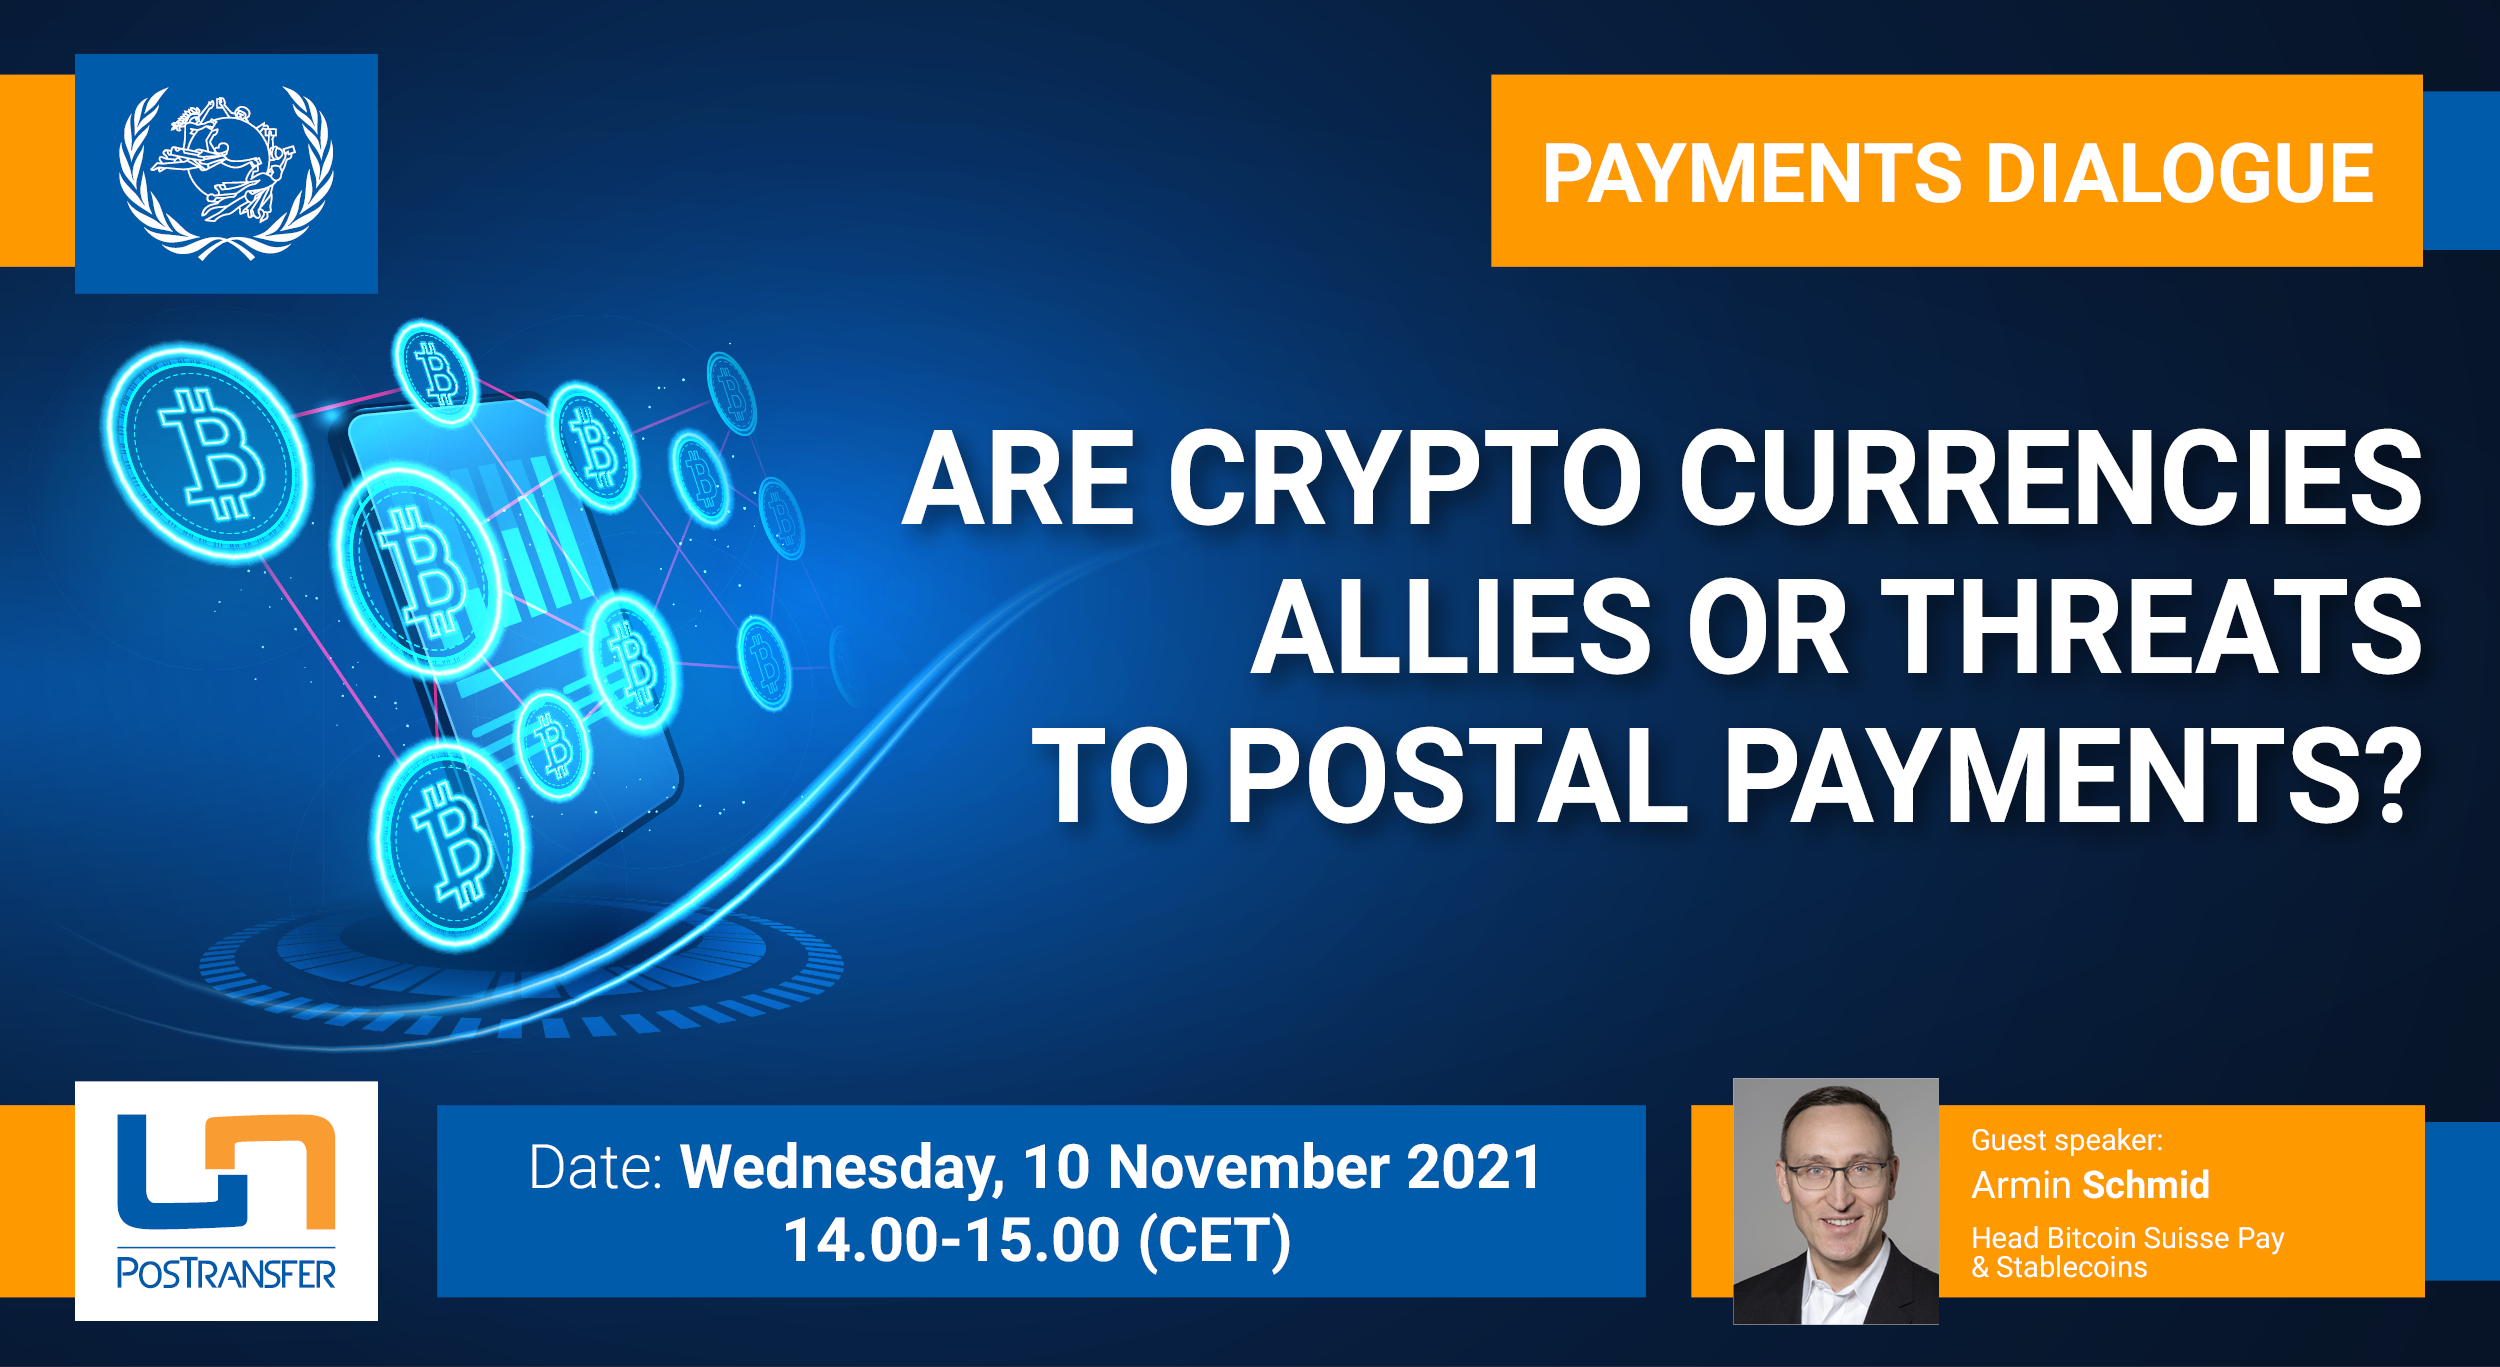 Are Crypto Currencies Allies or Threats to Postal Payments?